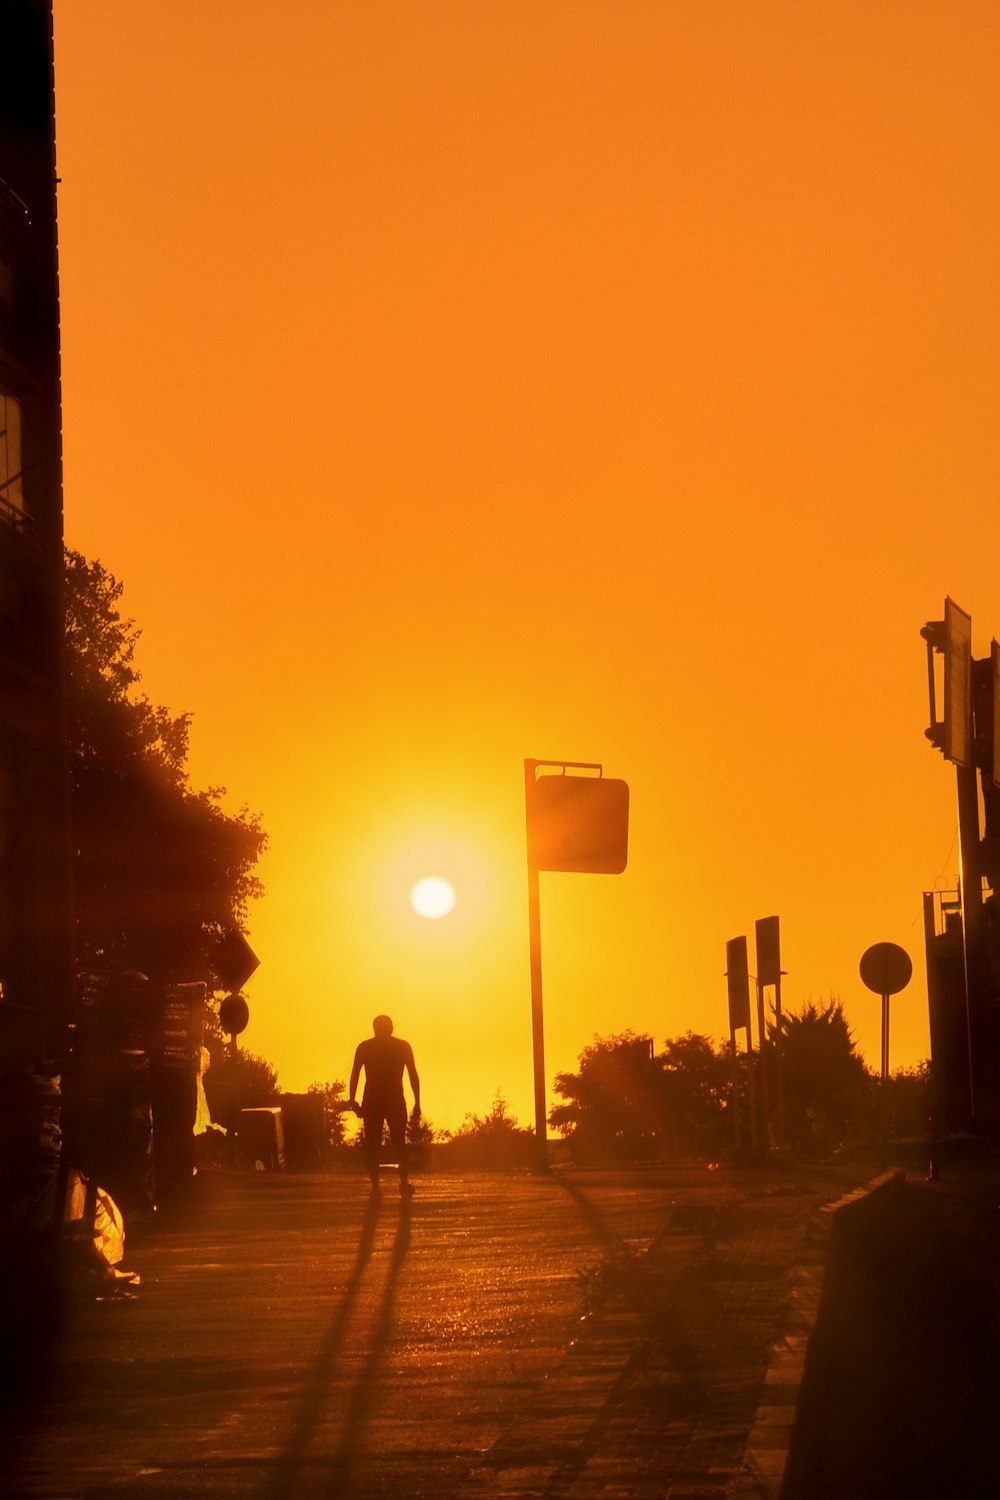 a person riding a bike down a street at sunset